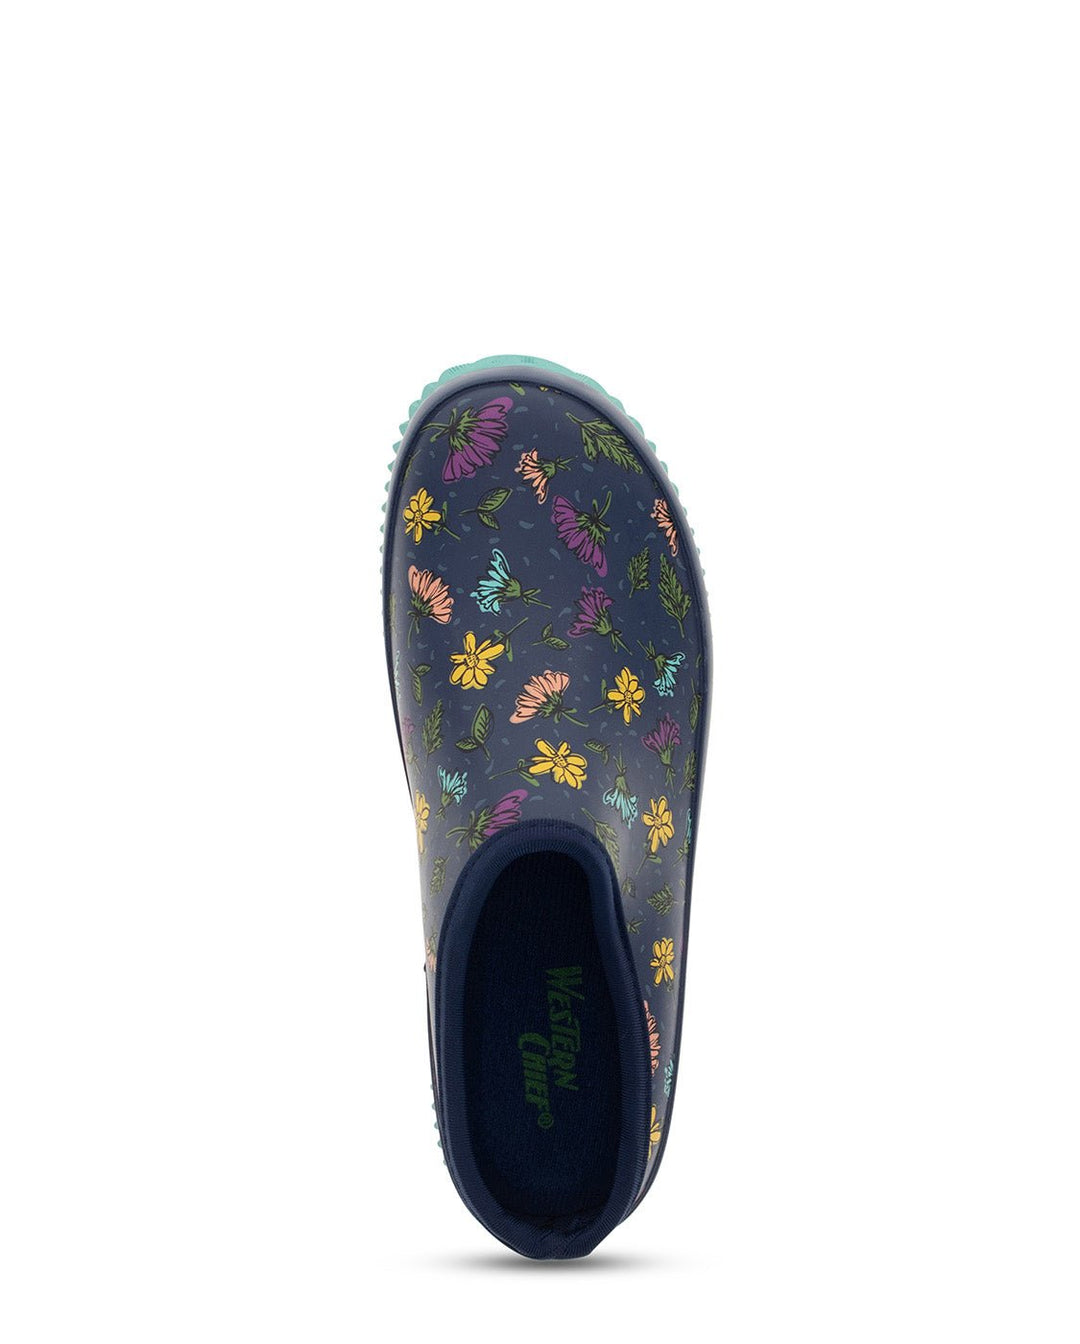 New! Women's Falling Floral Clog - Navy - Western Chief